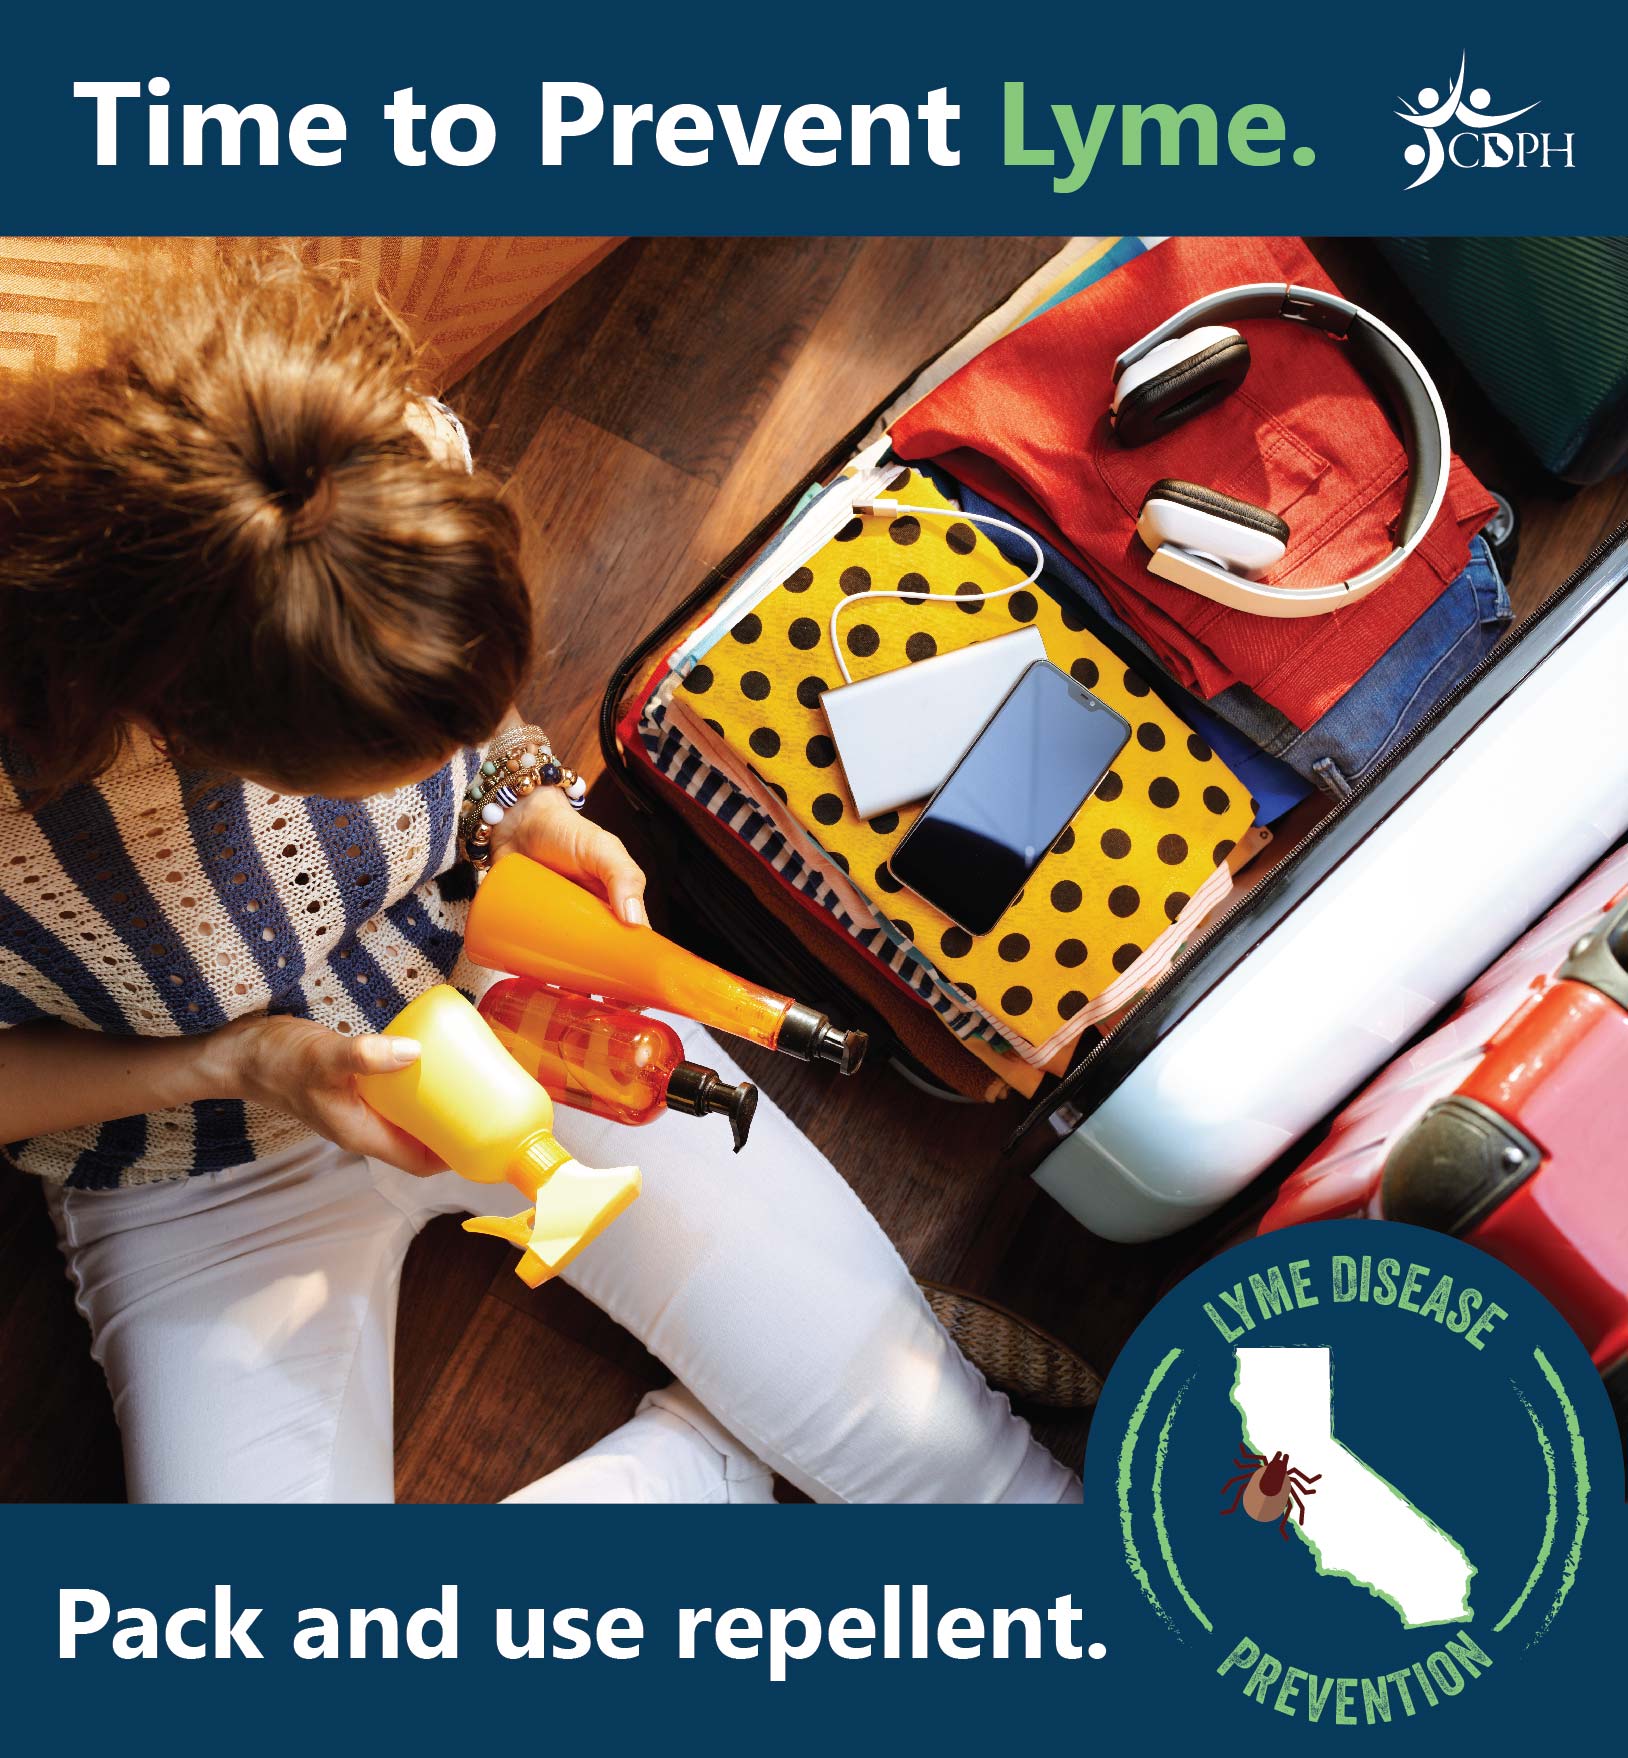 Time to Prevent Lyme. Pack and use repellent.